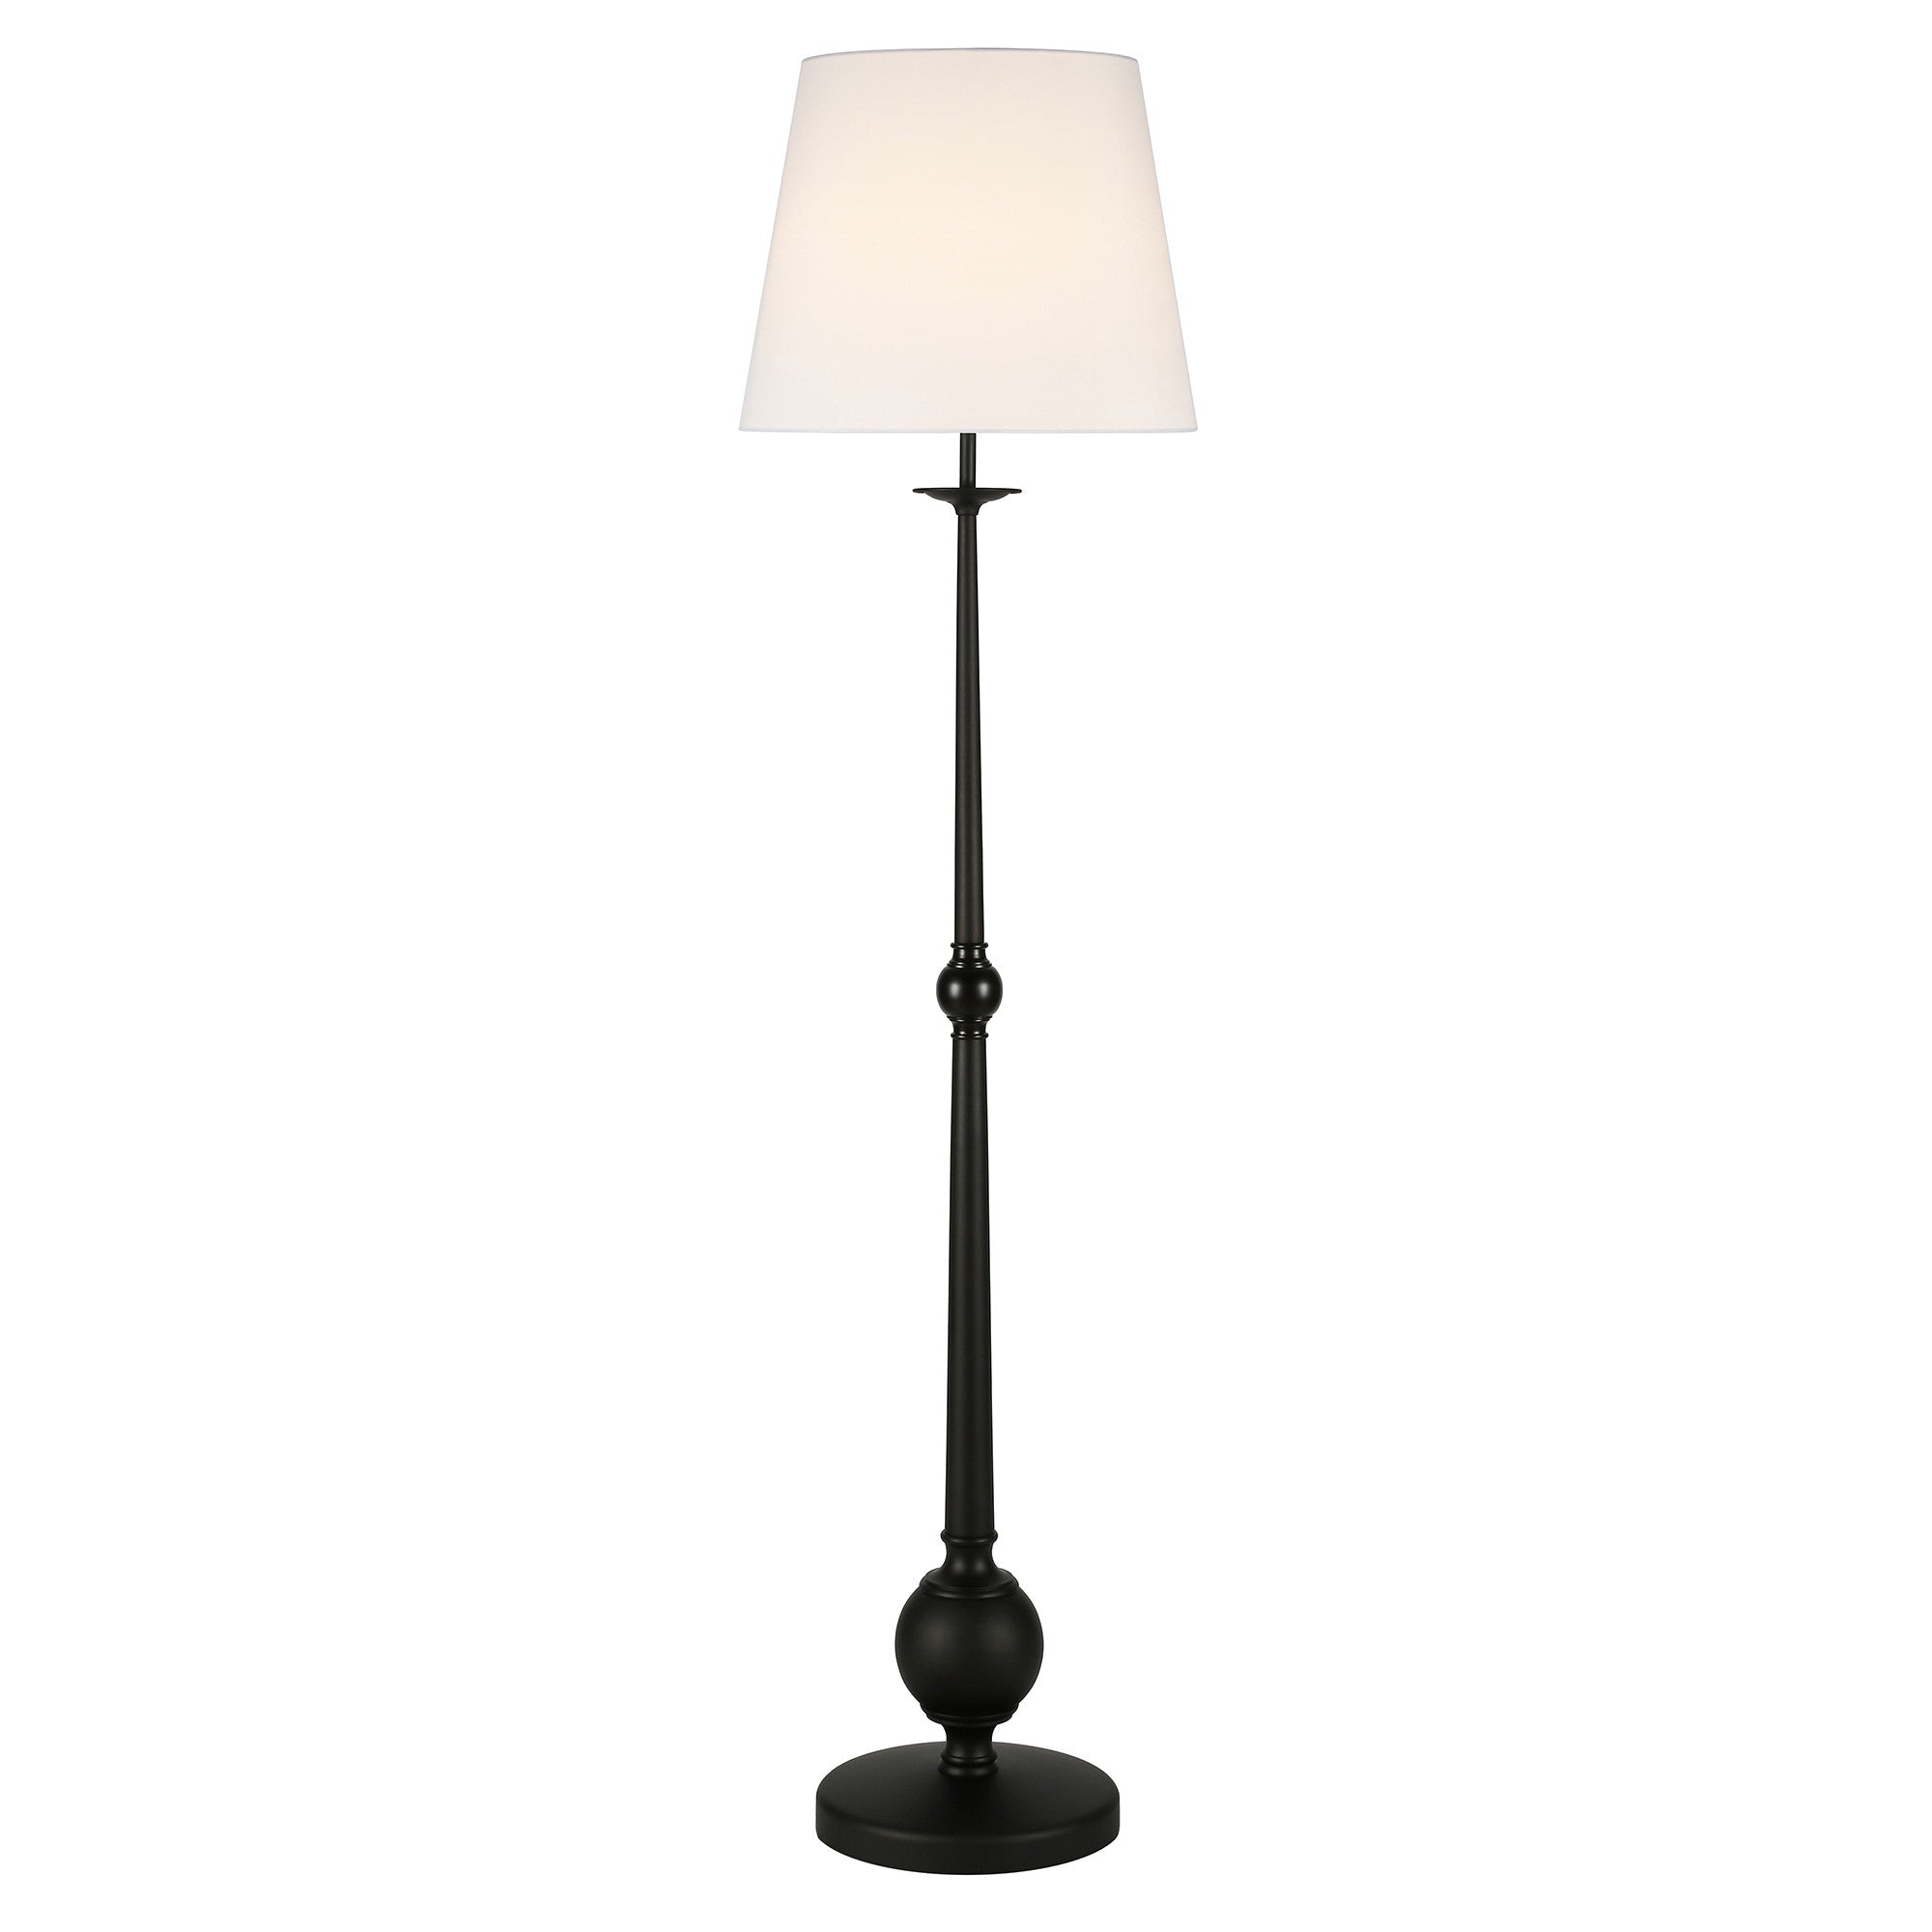 68" Black Traditional Shaped Floor Lamp With White Frosted Glass Drum Shade